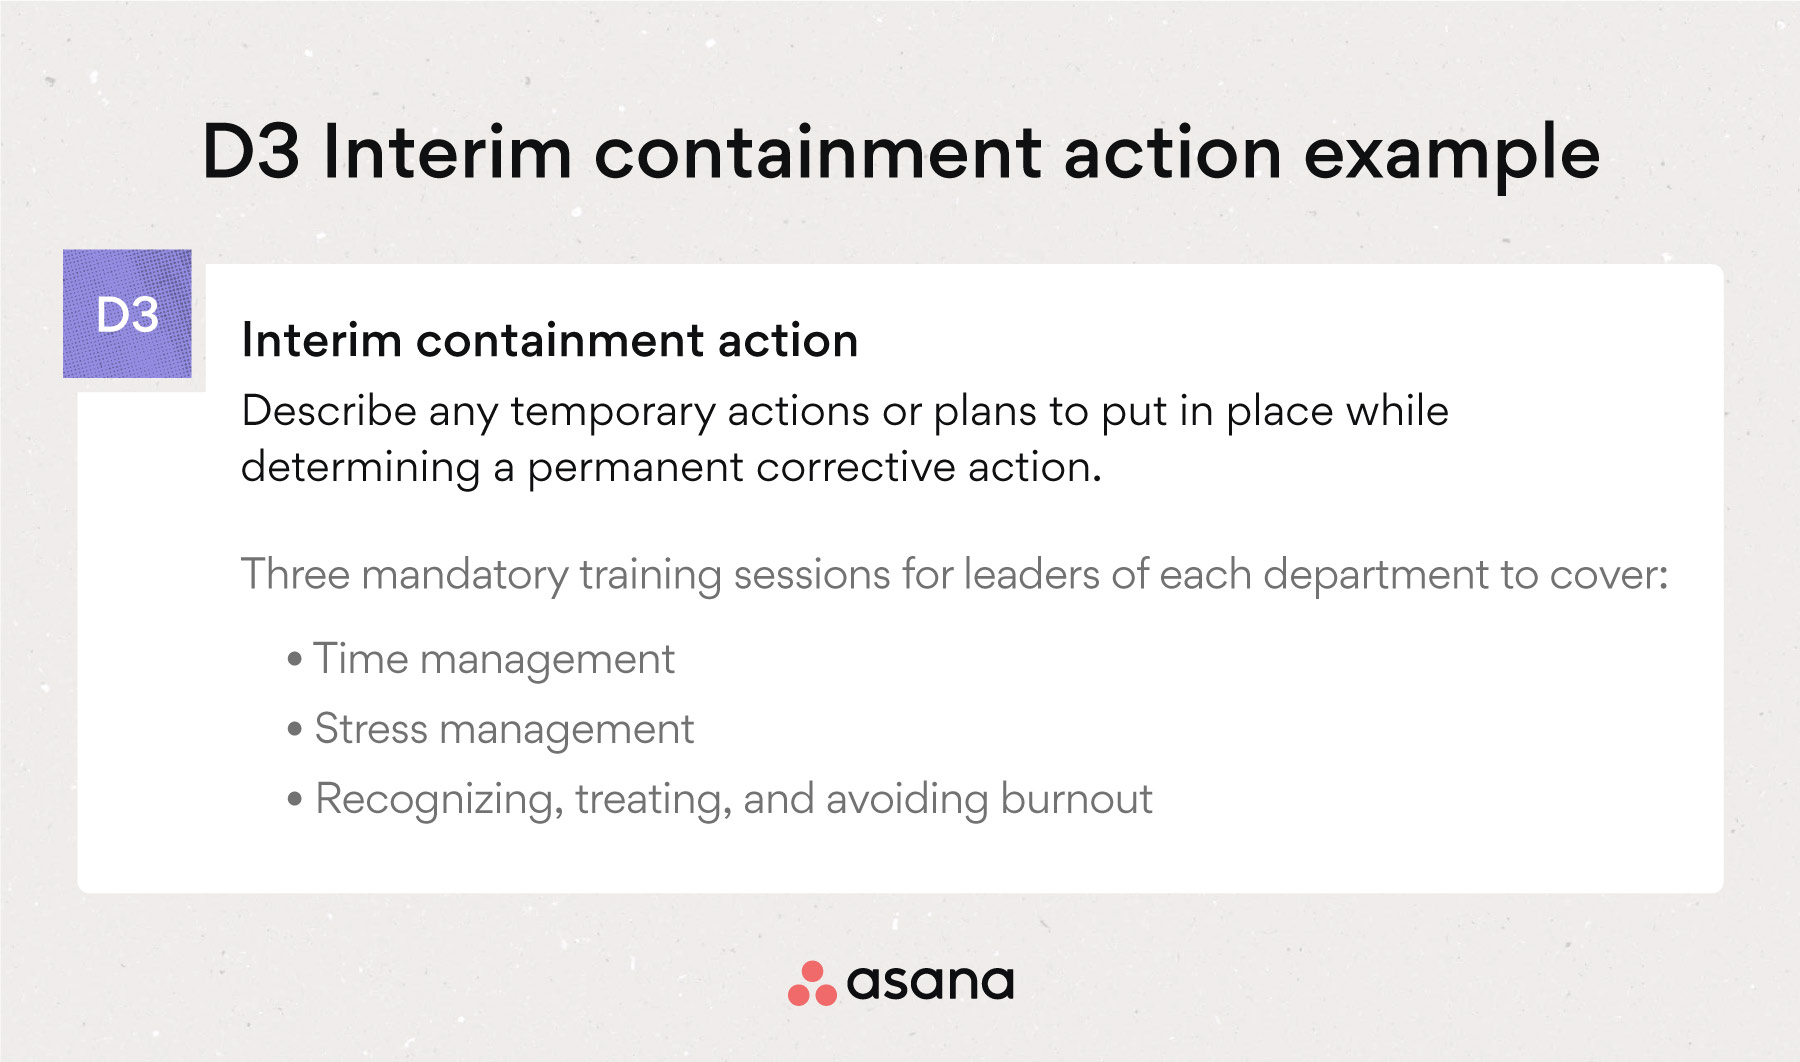 D3 Interim containment action example